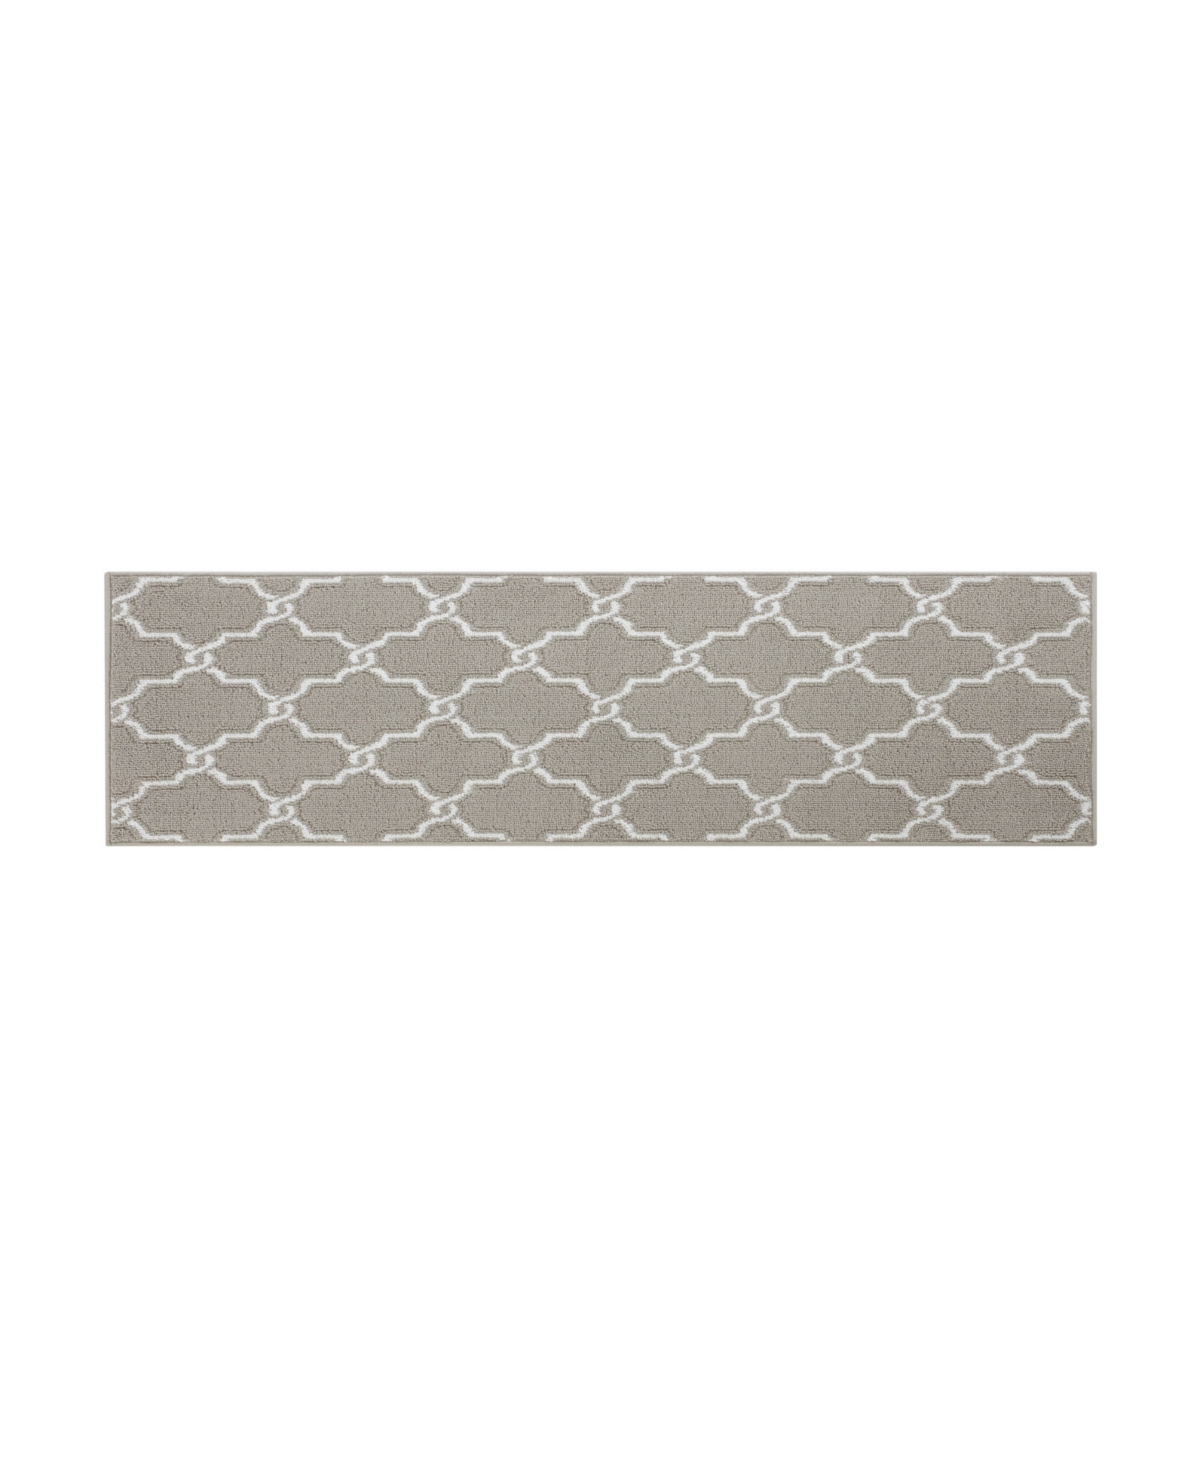 Jean Pierre - Machine Washable Yohan Trellis Tufted Runner Rug, 26" X 96" In Light Gray And White